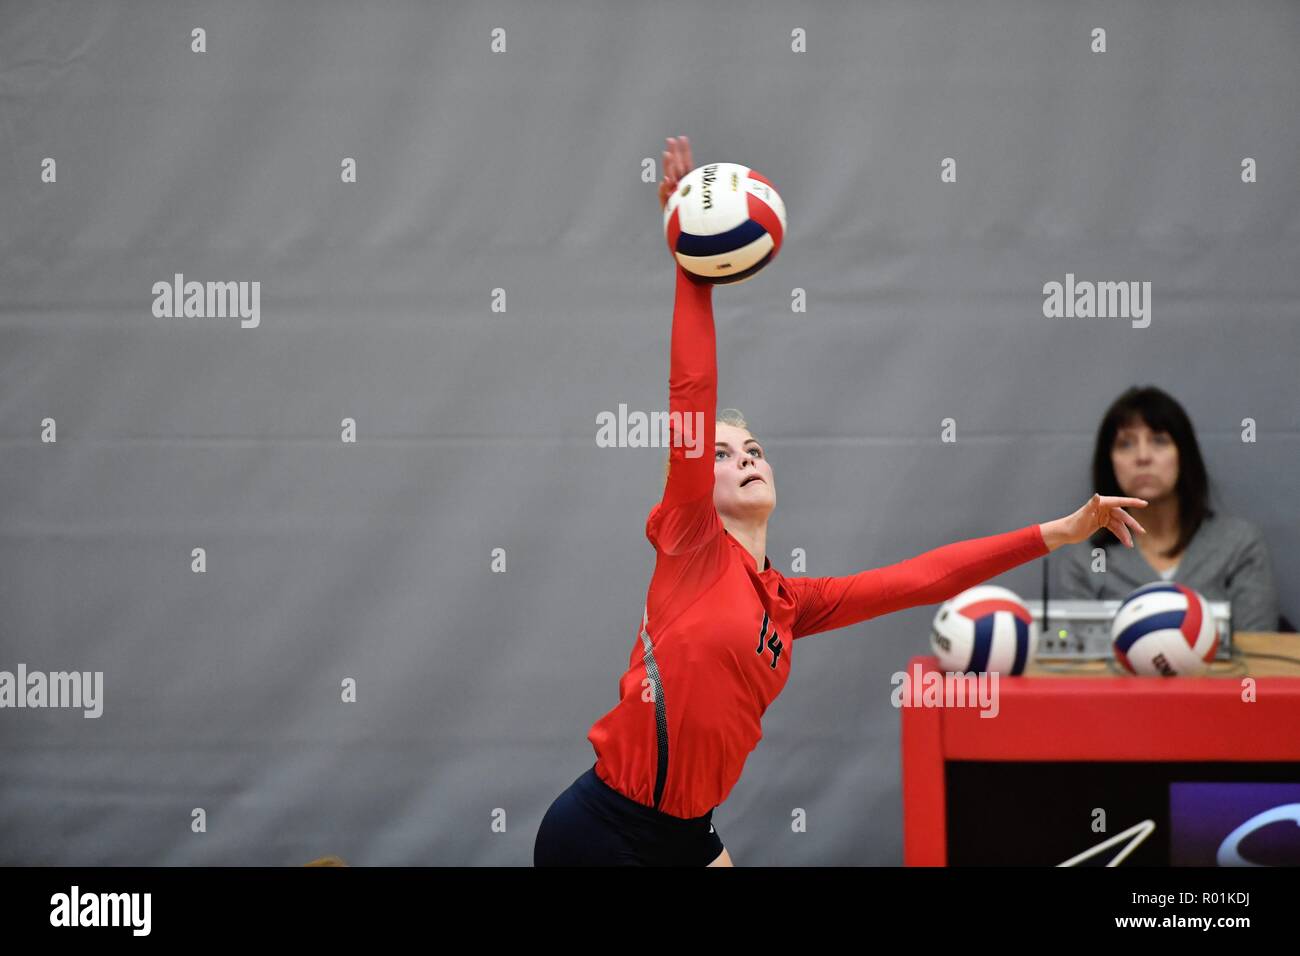 Player delivering a winning kill shot. USA. Stock Photo